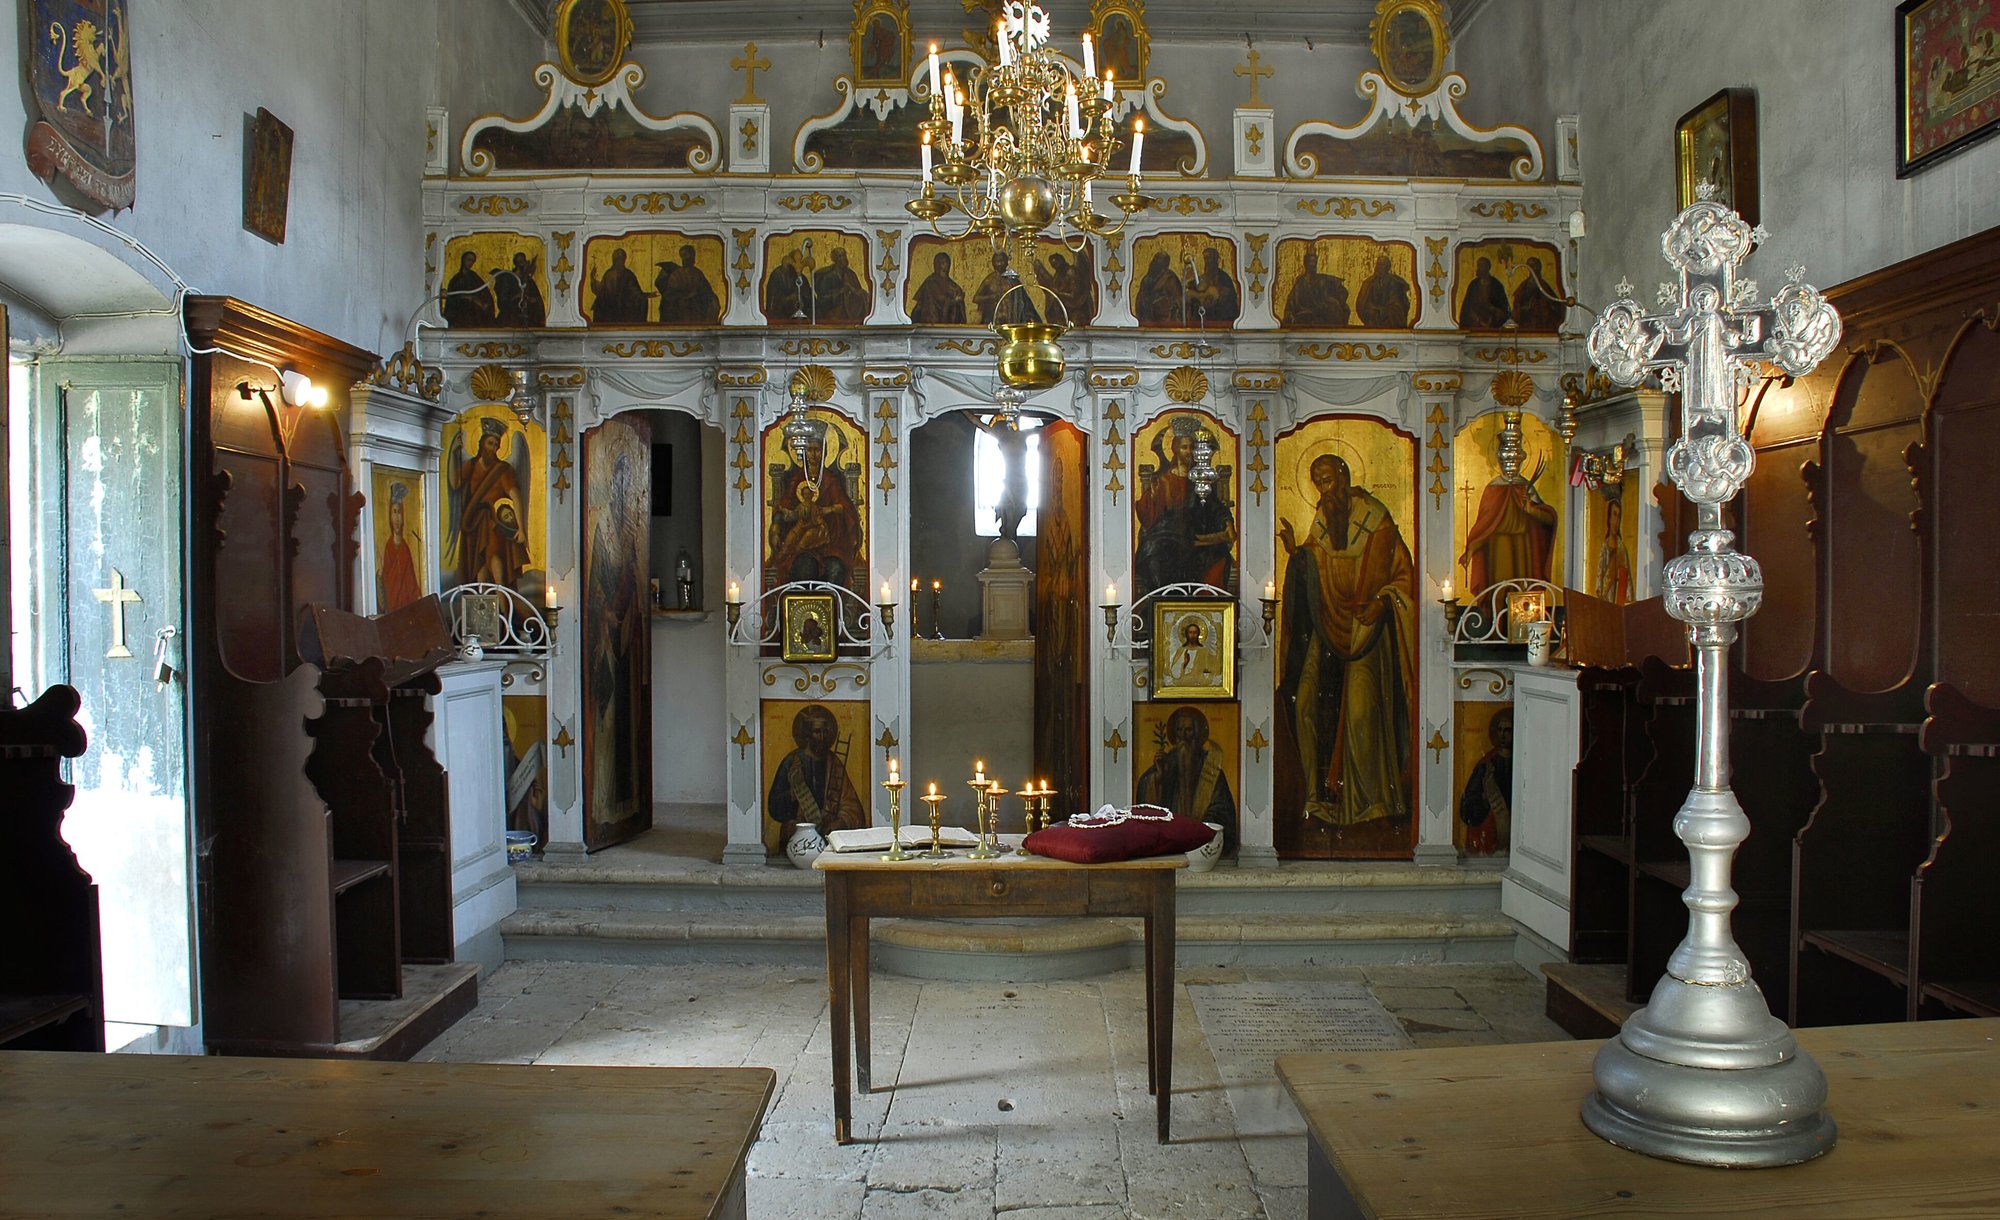 The private chapel